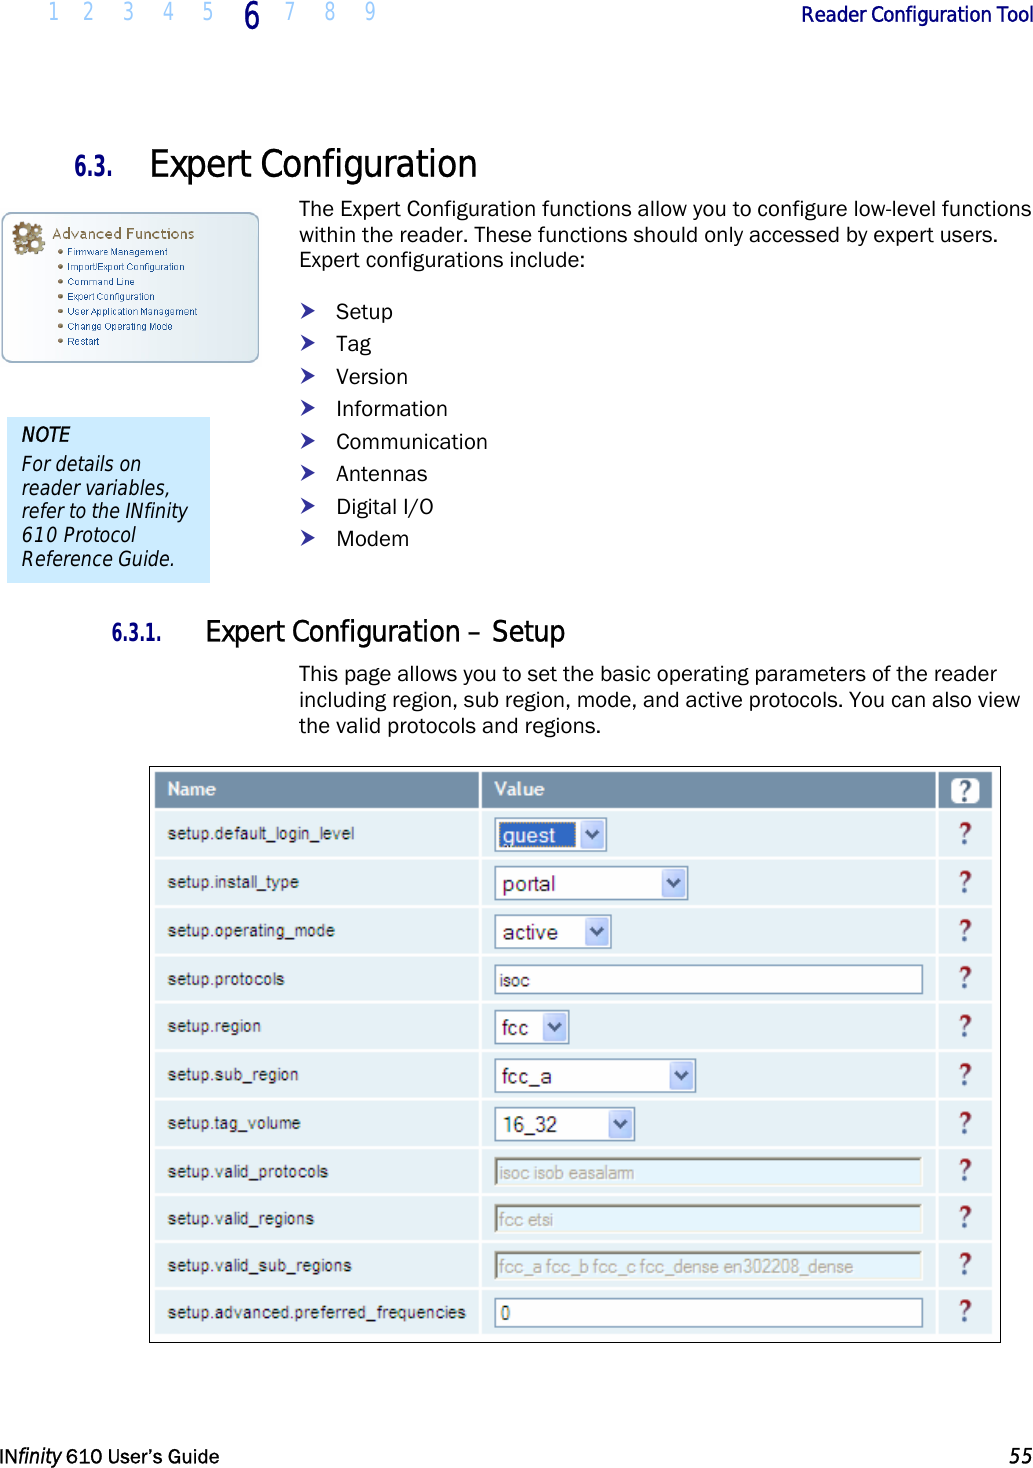  1 2 3 4 5 6  7 8 9        Reader Configuration Tool   INfinity 610 User’s Guide  55  6.3. Expert Configuration The Expert Configuration functions allow you to configure low-level functions within the reader. These functions should only accessed by expert users. Expert configurations include: h Setup h Tag h Version h Information h Communication h Antennas h Digital I/O h Modem  6.3.1. Expert Configuration – Setup This page allows you to set the basic operating parameters of the reader including region, sub region, mode, and active protocols. You can also view the valid protocols and regions.  NOTE For details on reader variables, refer to the INfinity 610 Protocol Reference Guide. 